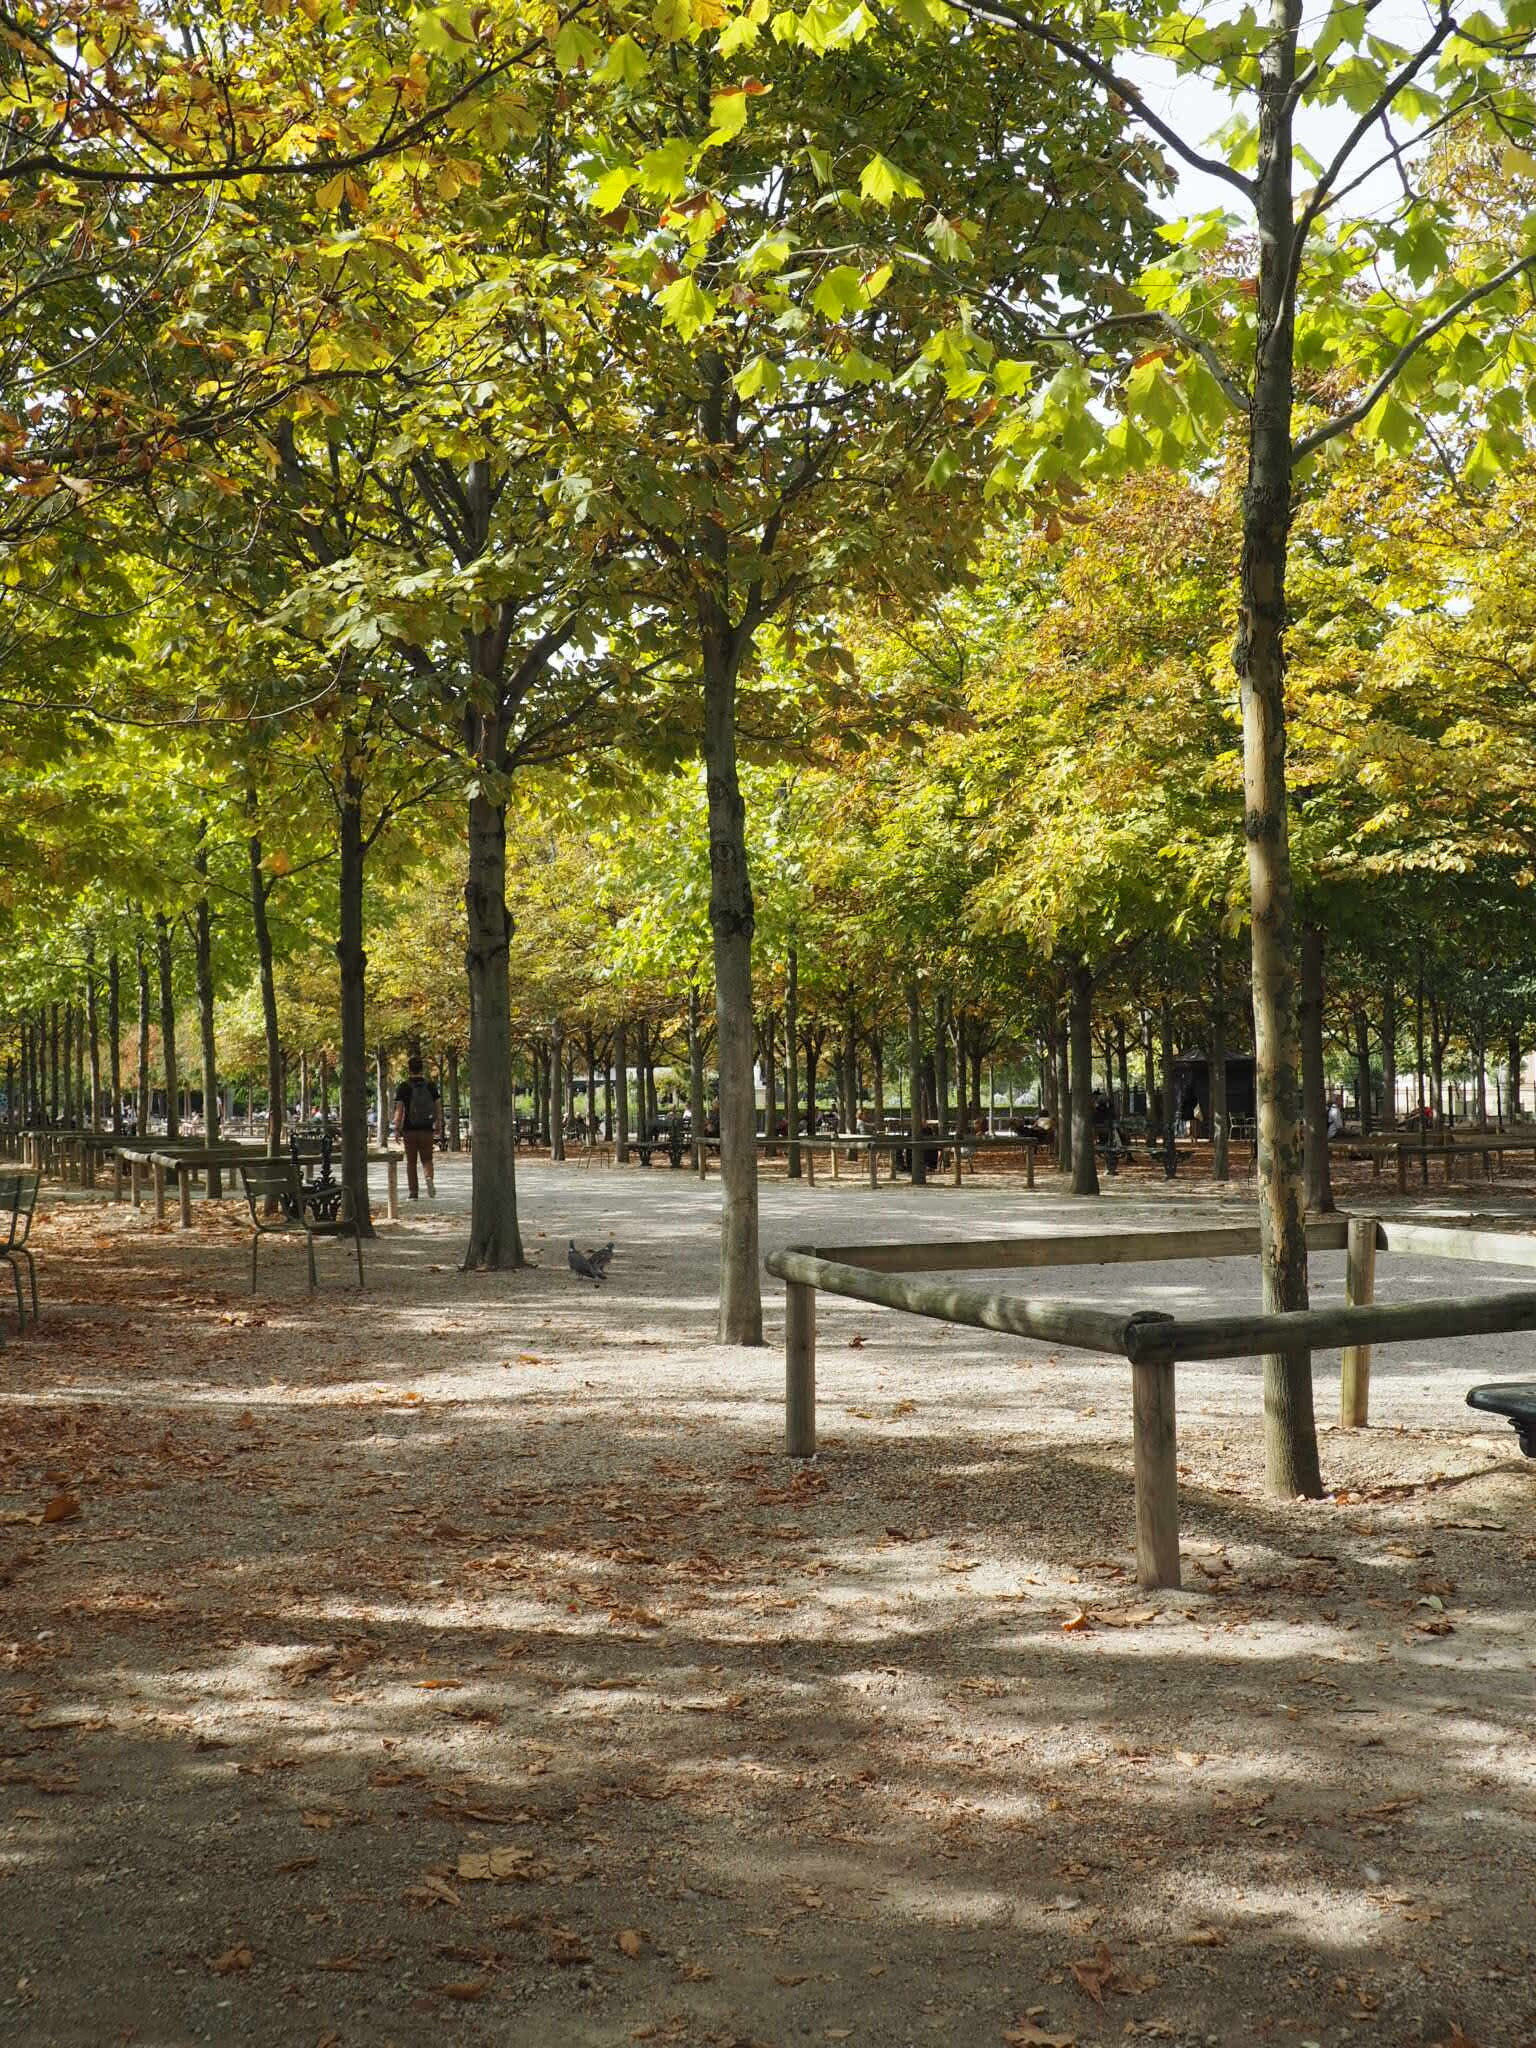 Plane trees in the Luxembourg Gardens